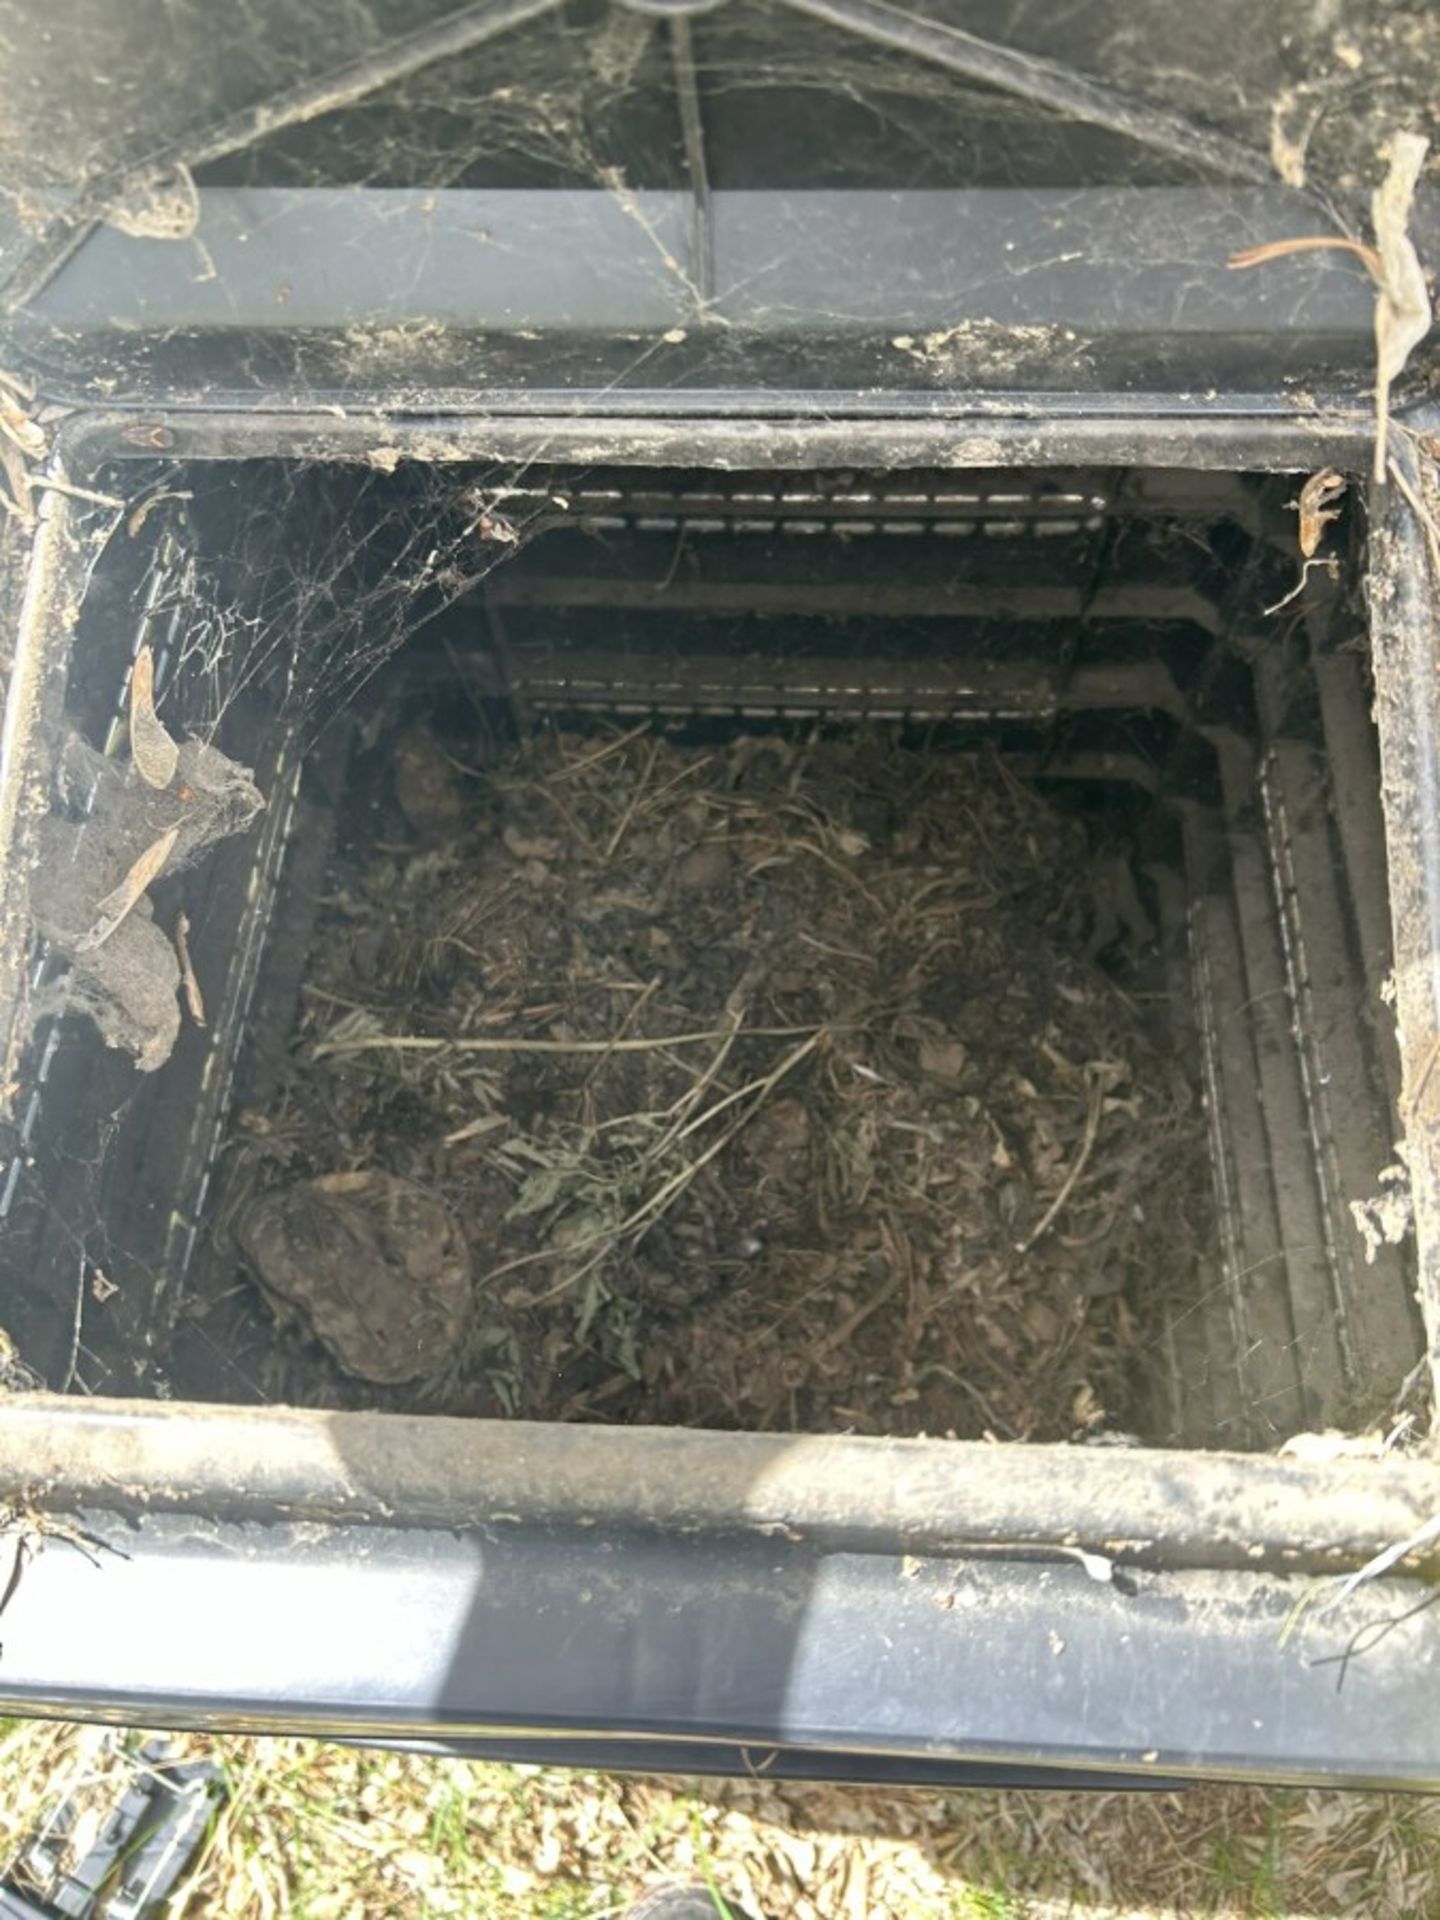 SCEPTER POLY COMPOST BIN - Image 3 of 3